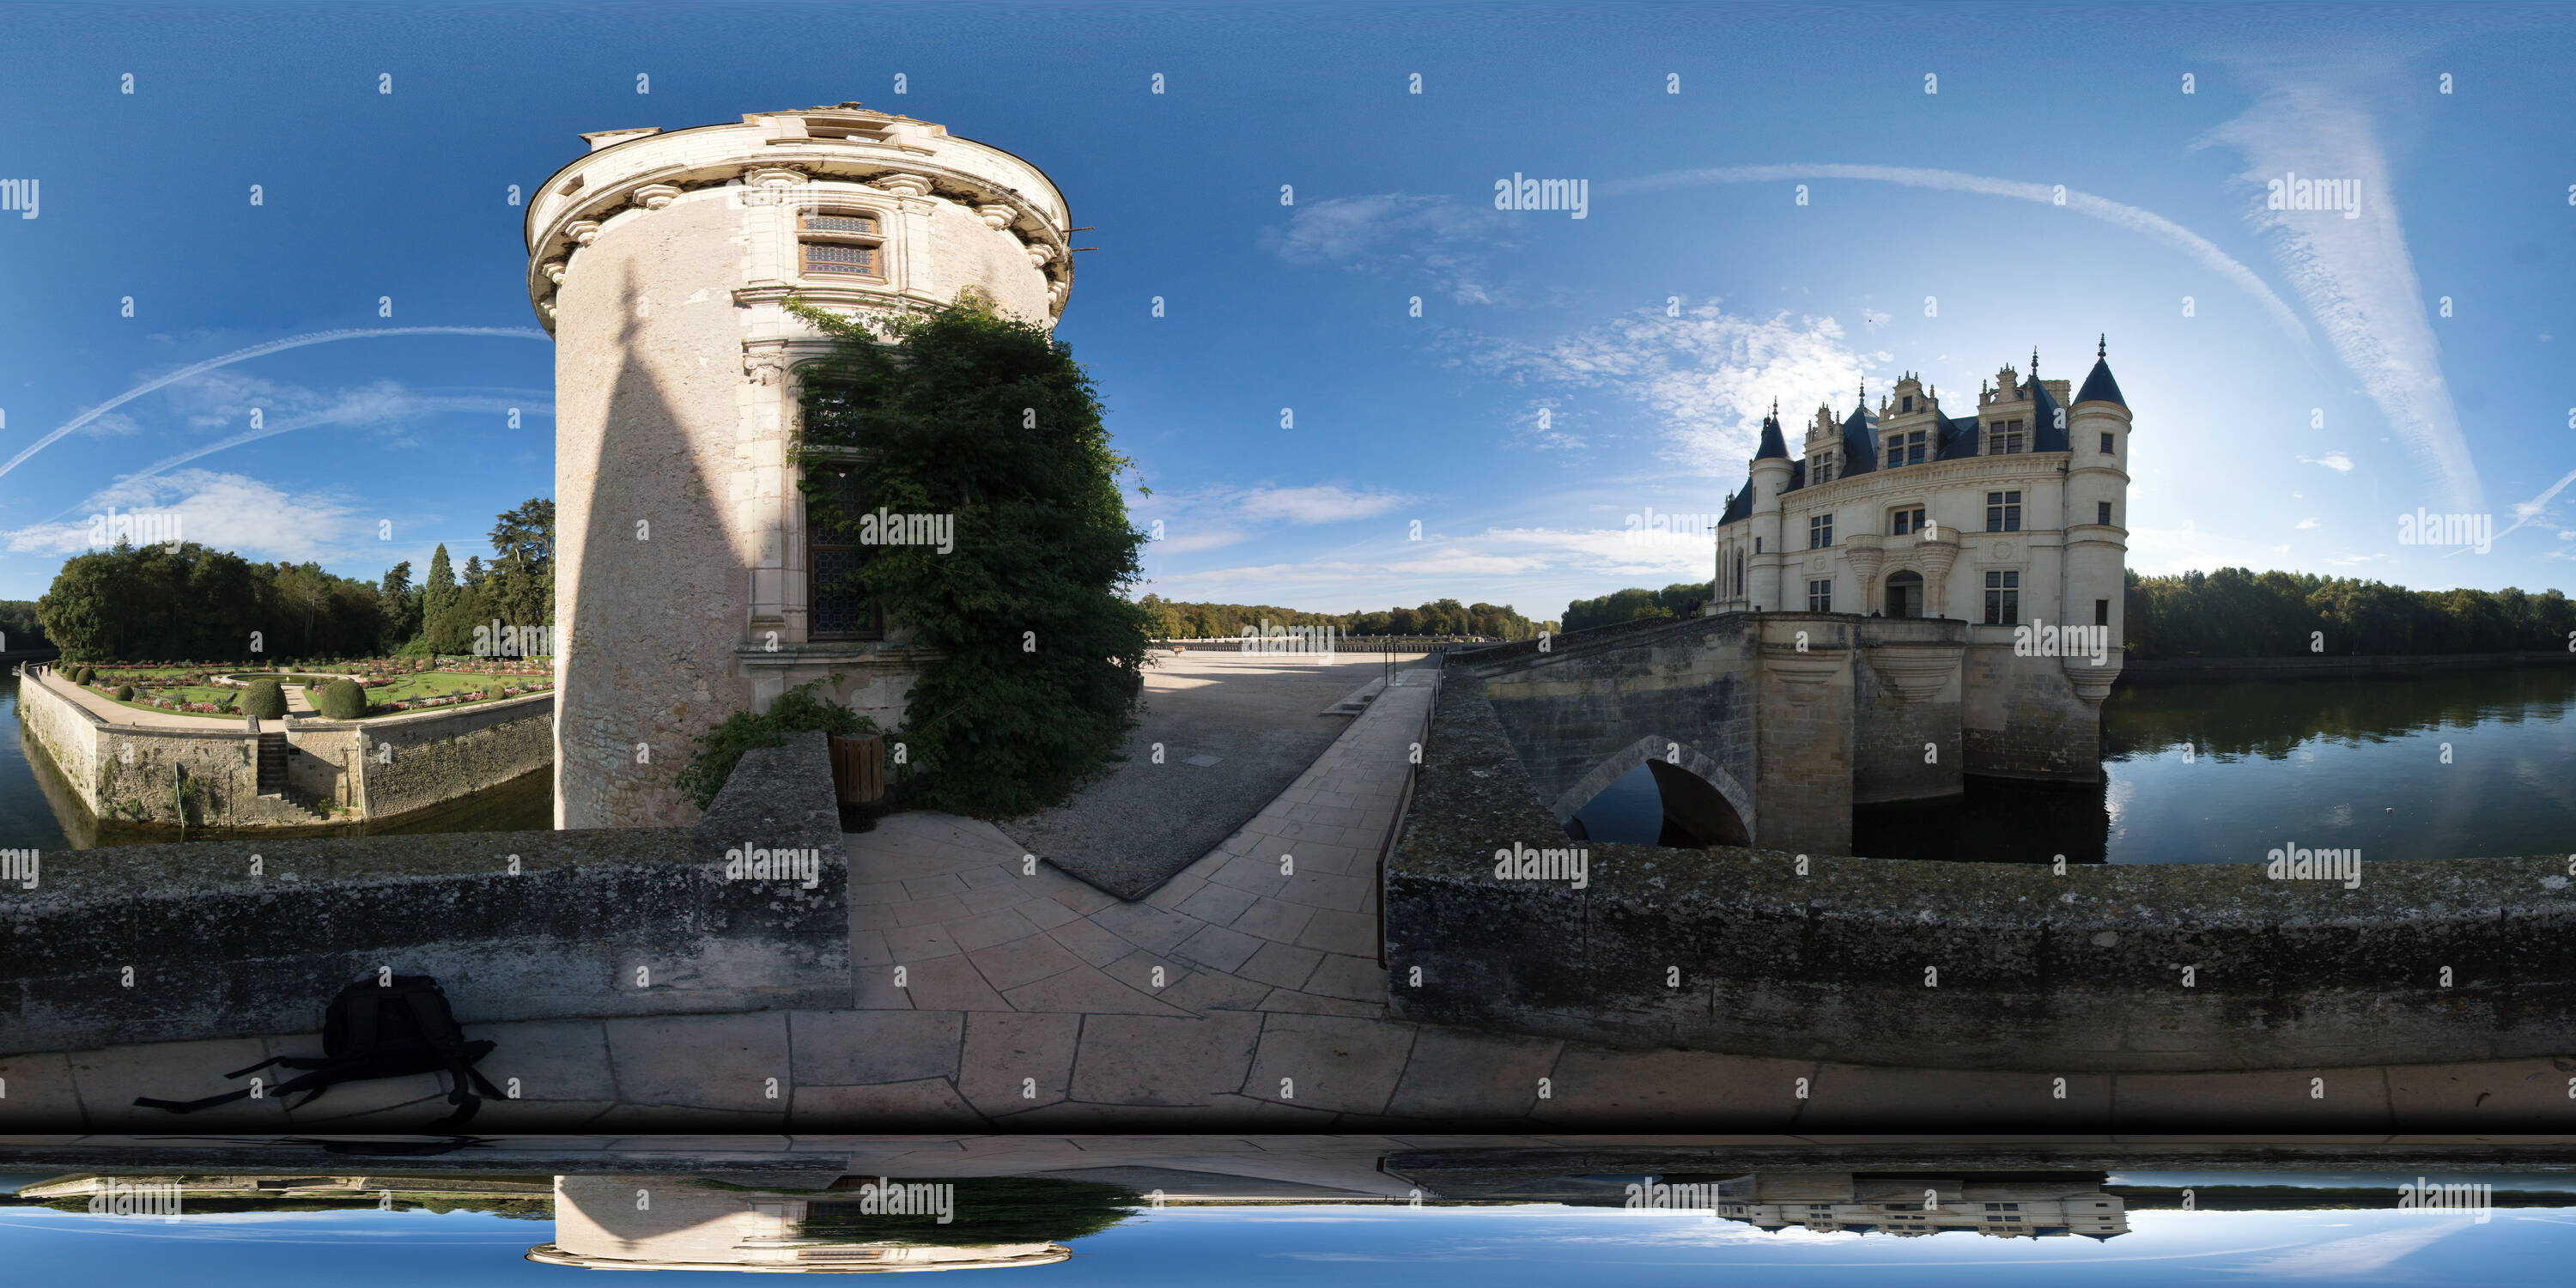 360 degree panoramic view of Chateau De Chenonceau, View From North, 2016-10, freehand